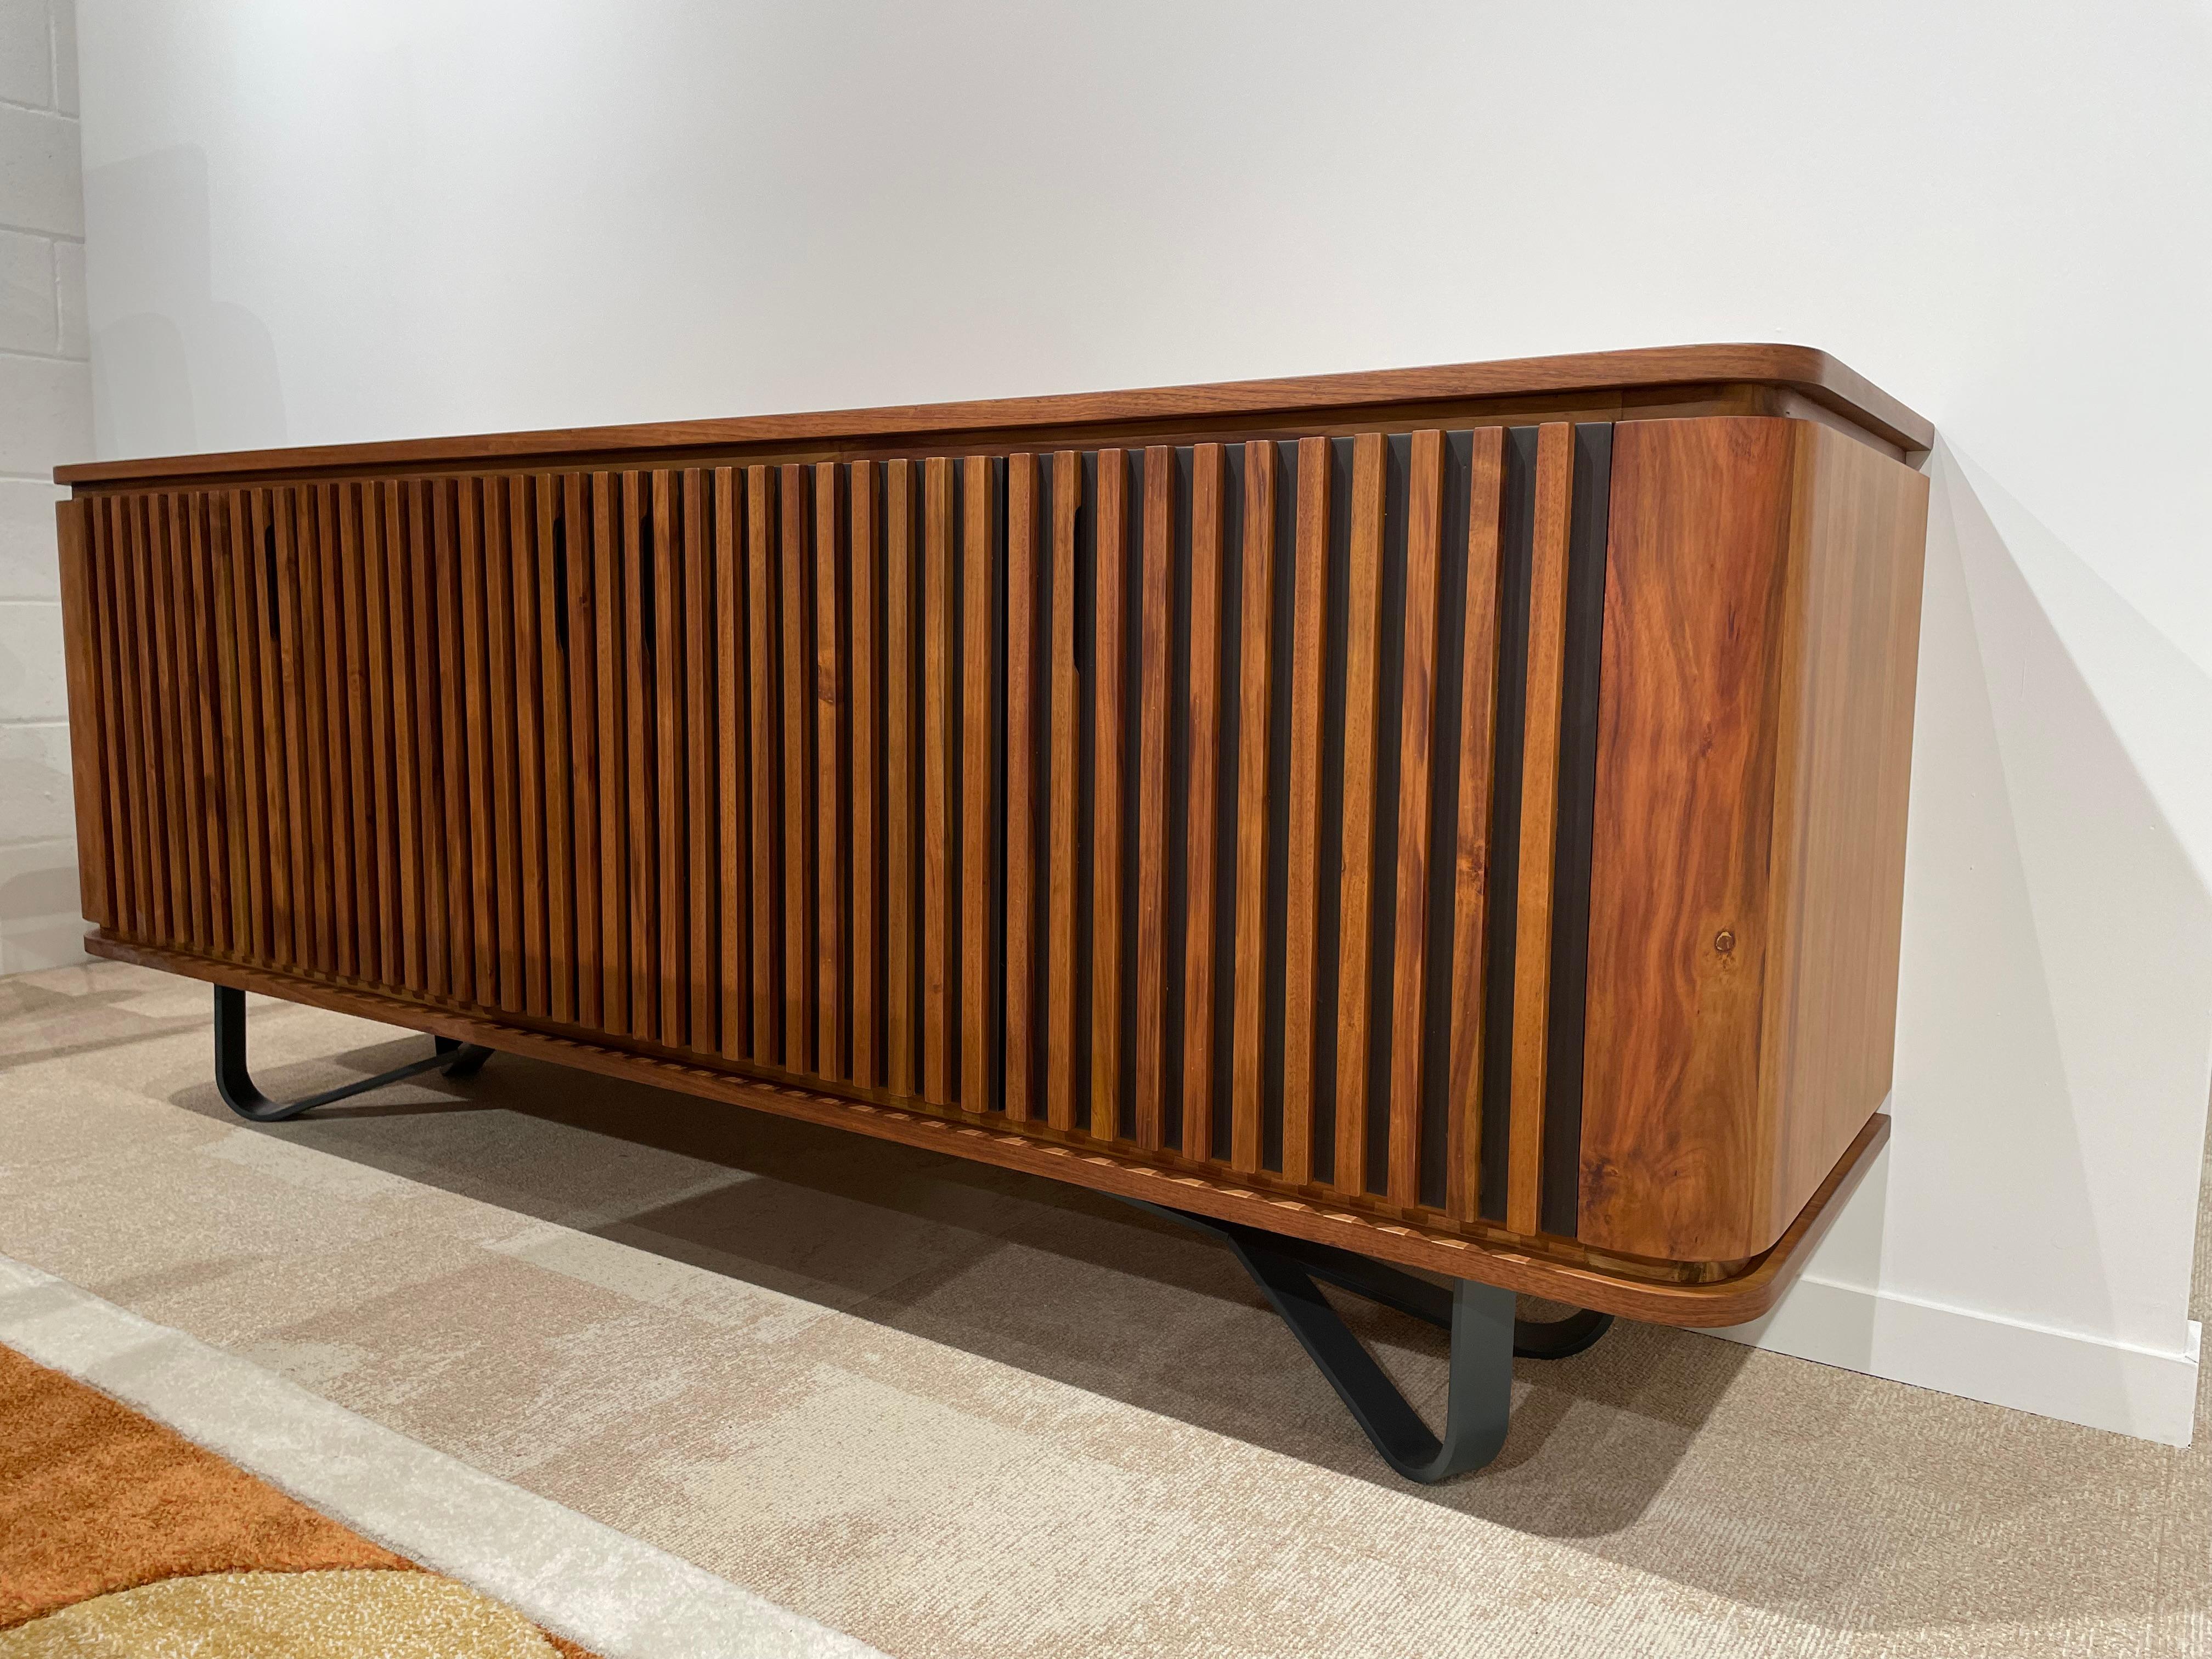 1950s Design and MCM style wood and metal sideboard in hight quality craftmanship and fully customizable in sizes, color, wood.